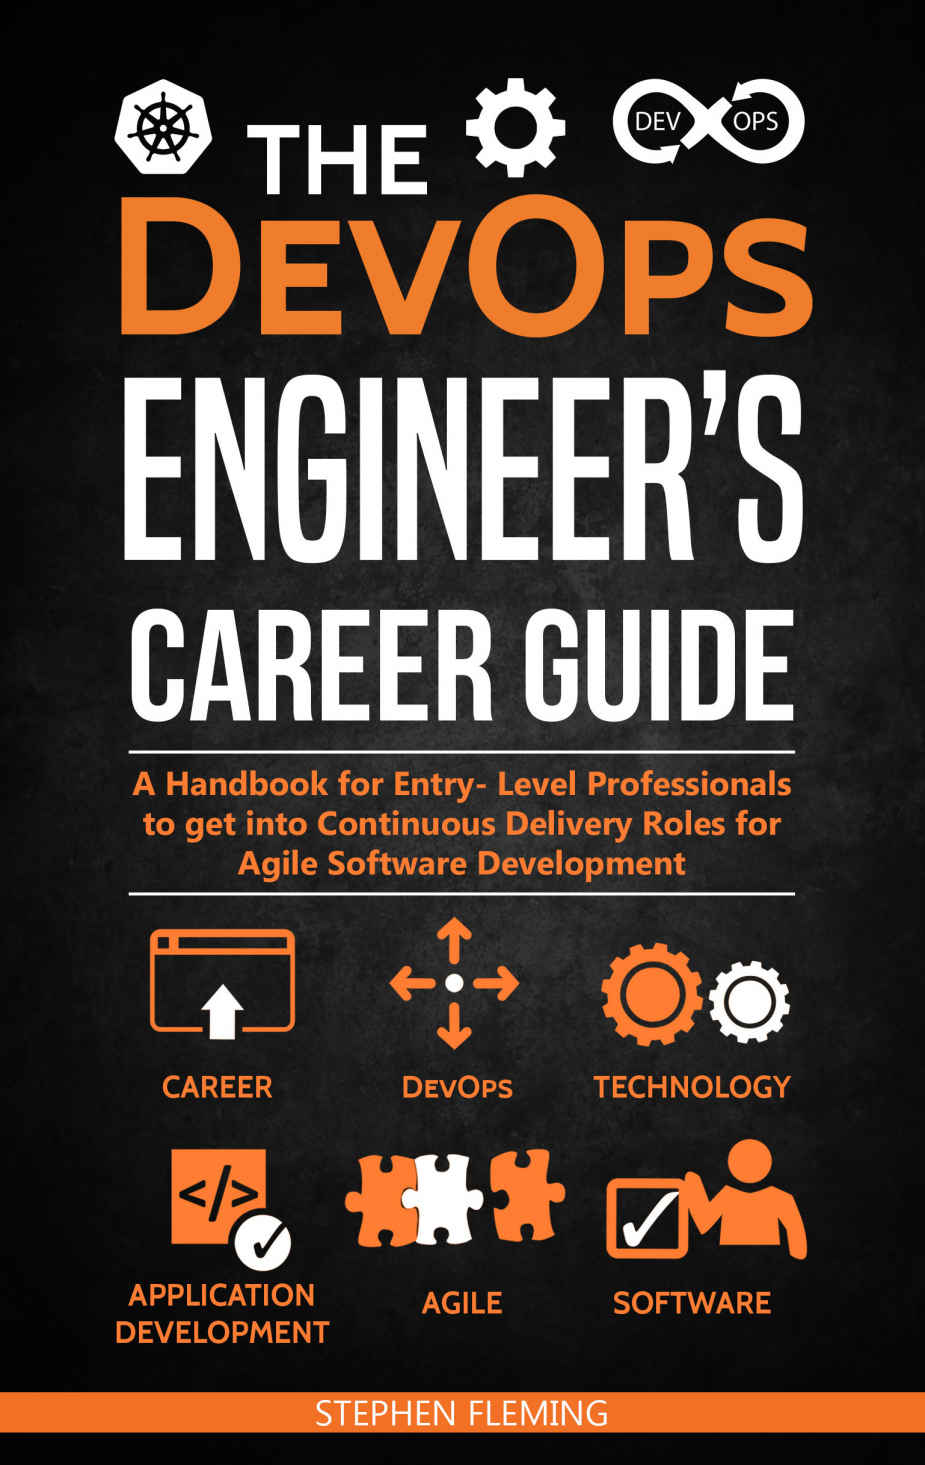 The DevOps Engineer's Career Guide: A Handbook for Entry- Level Professionals to Get Into Continuous Delivery Roles for Agile Software Development